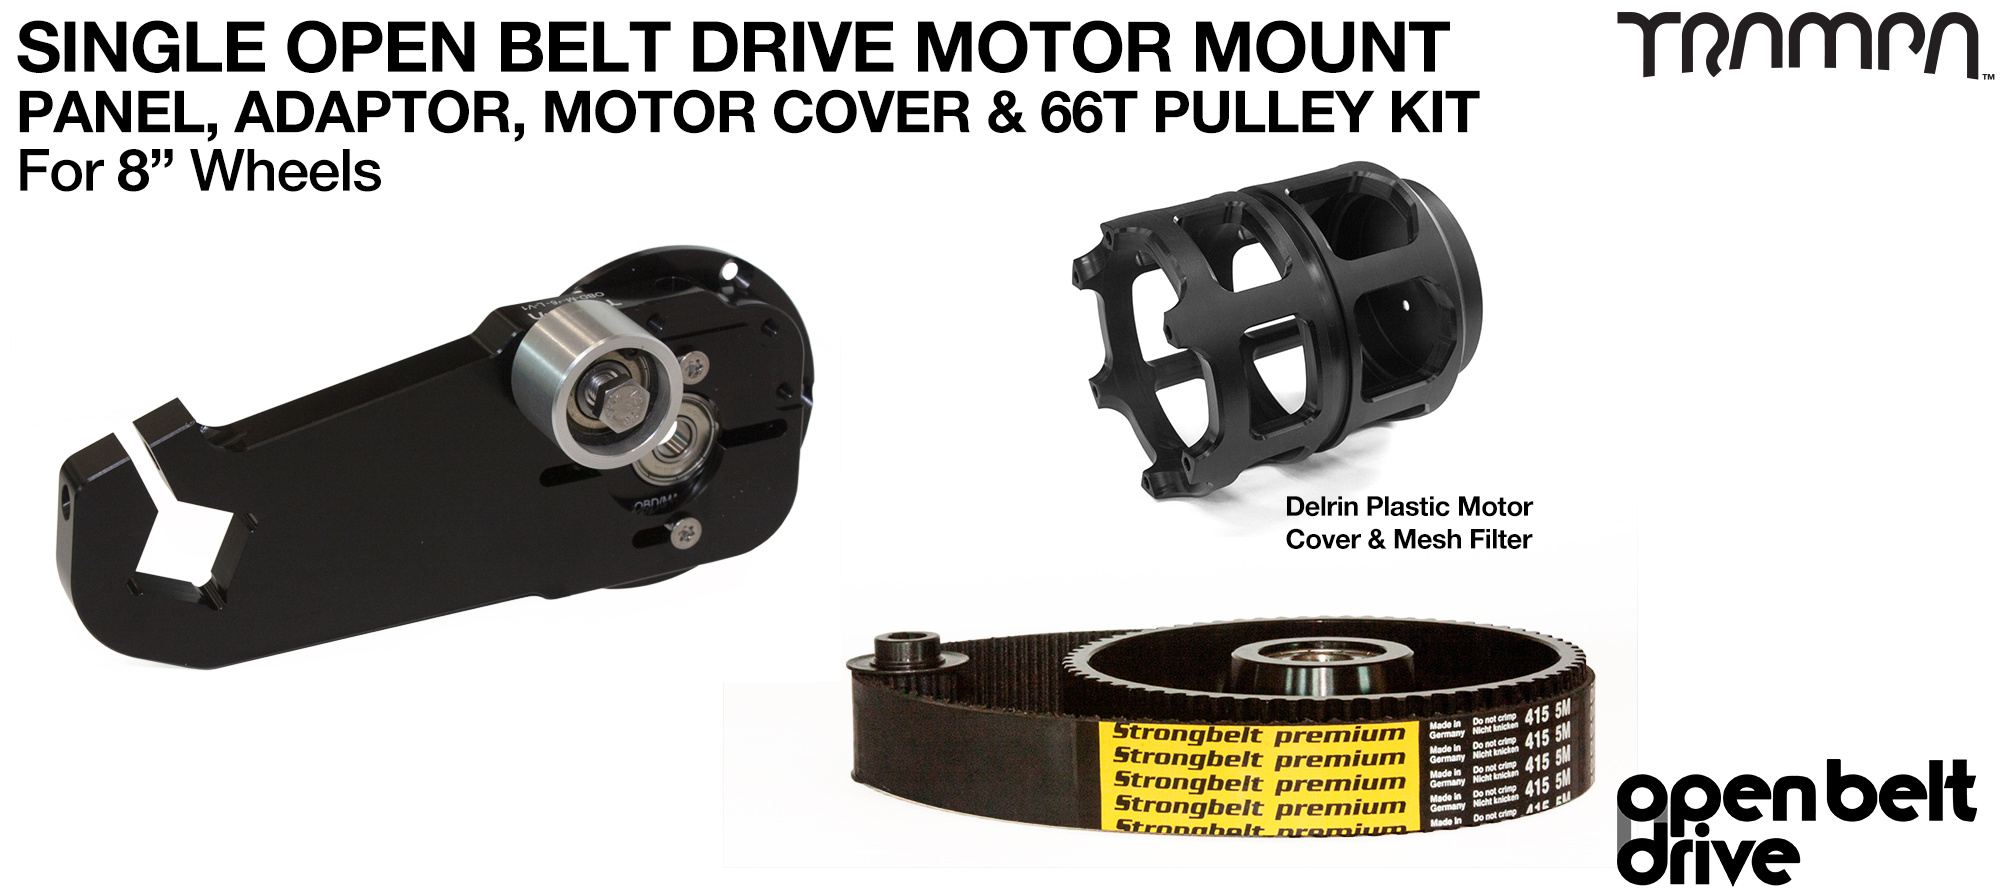 66T Open Belt Drive OBD Motor Mount with 66 tooth Pulley Kit for 8 inch Wheels & Motor Protection - SINGLE